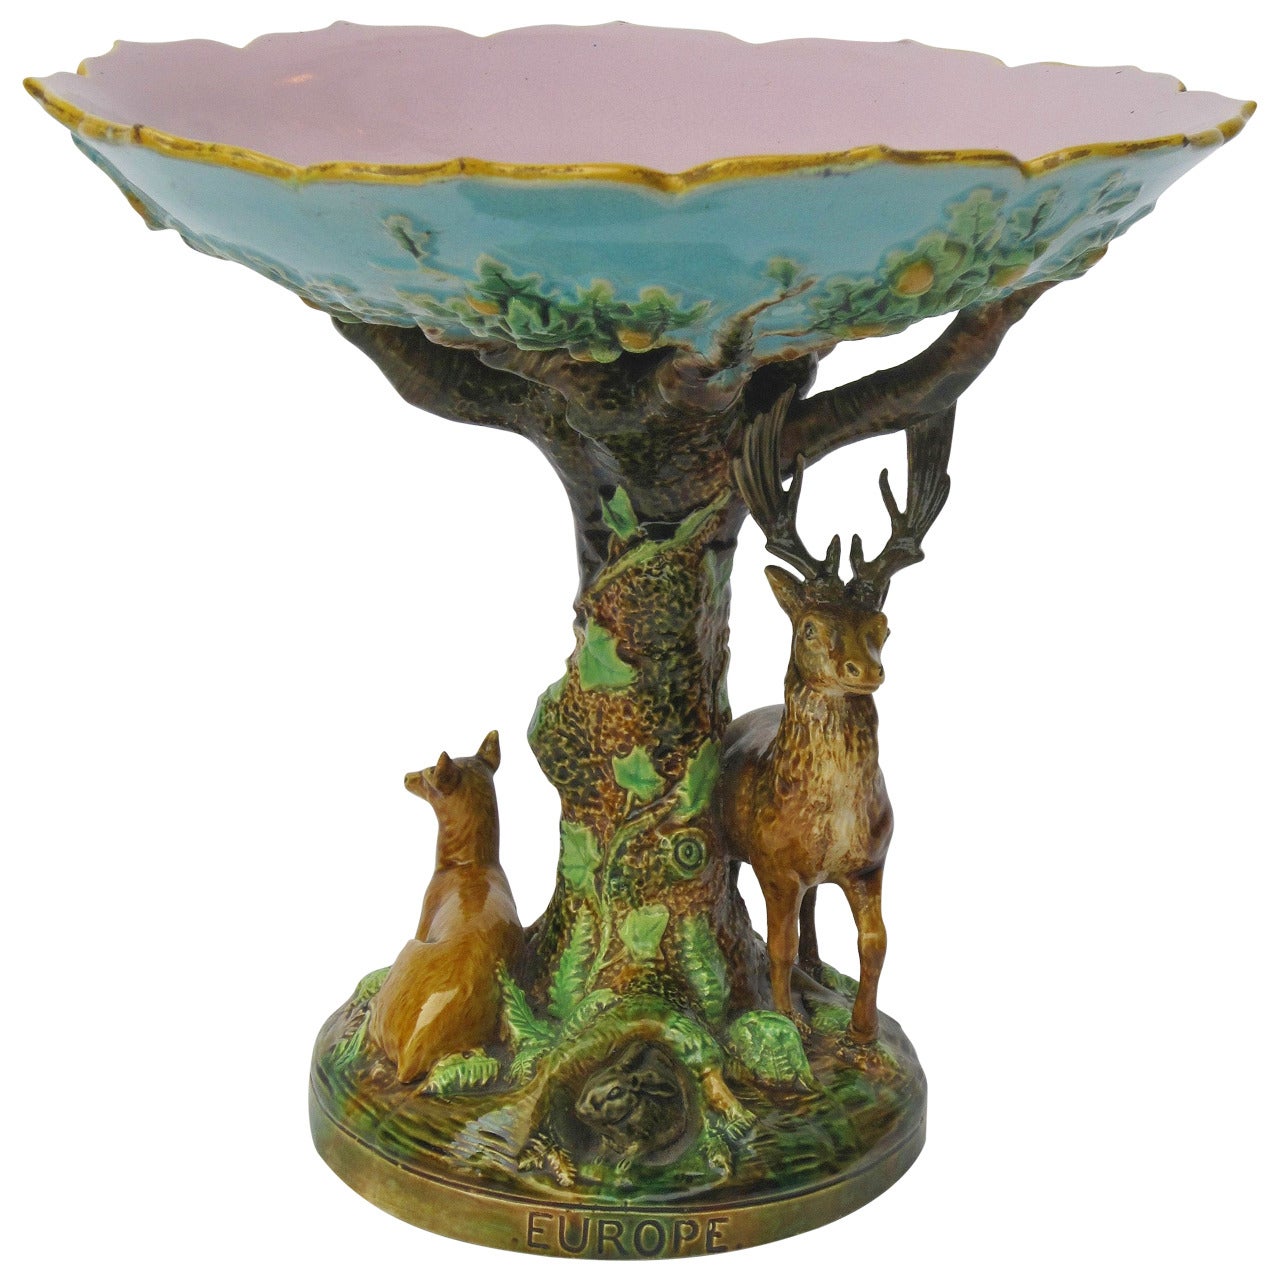 English Majolica "Europe" Compote by George Jones